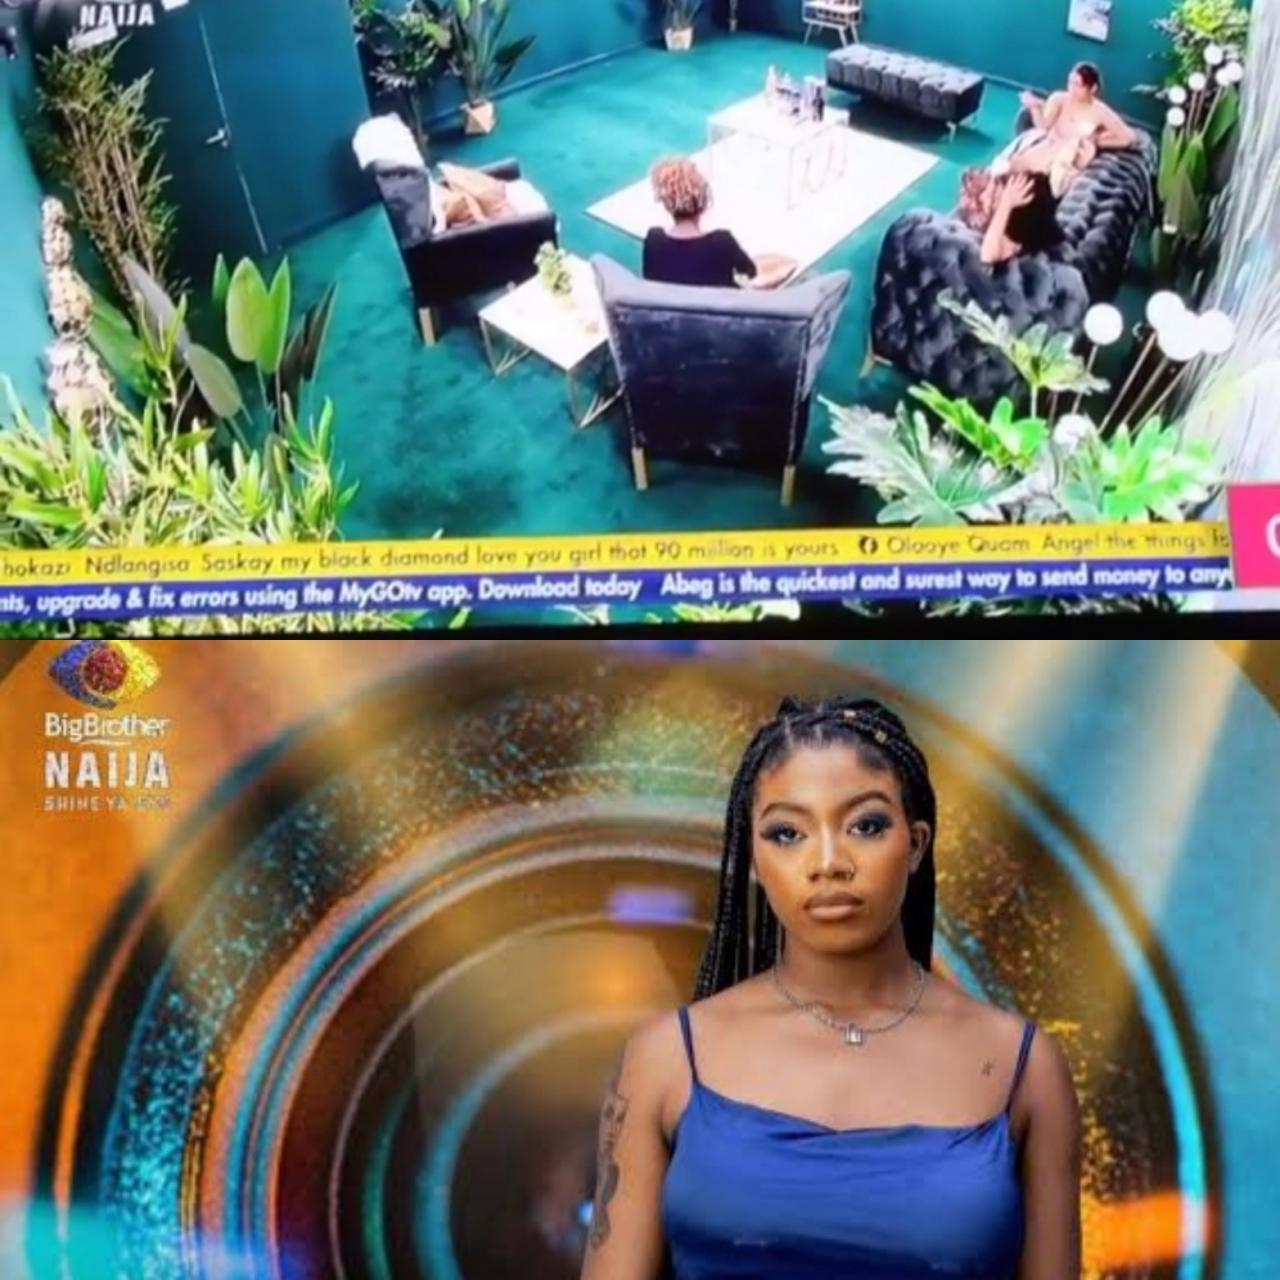 "She has the worst, dirtiest, nastiest v*gina" Peace, Maria and Nini gossip about Angel in the executive lounge (video)